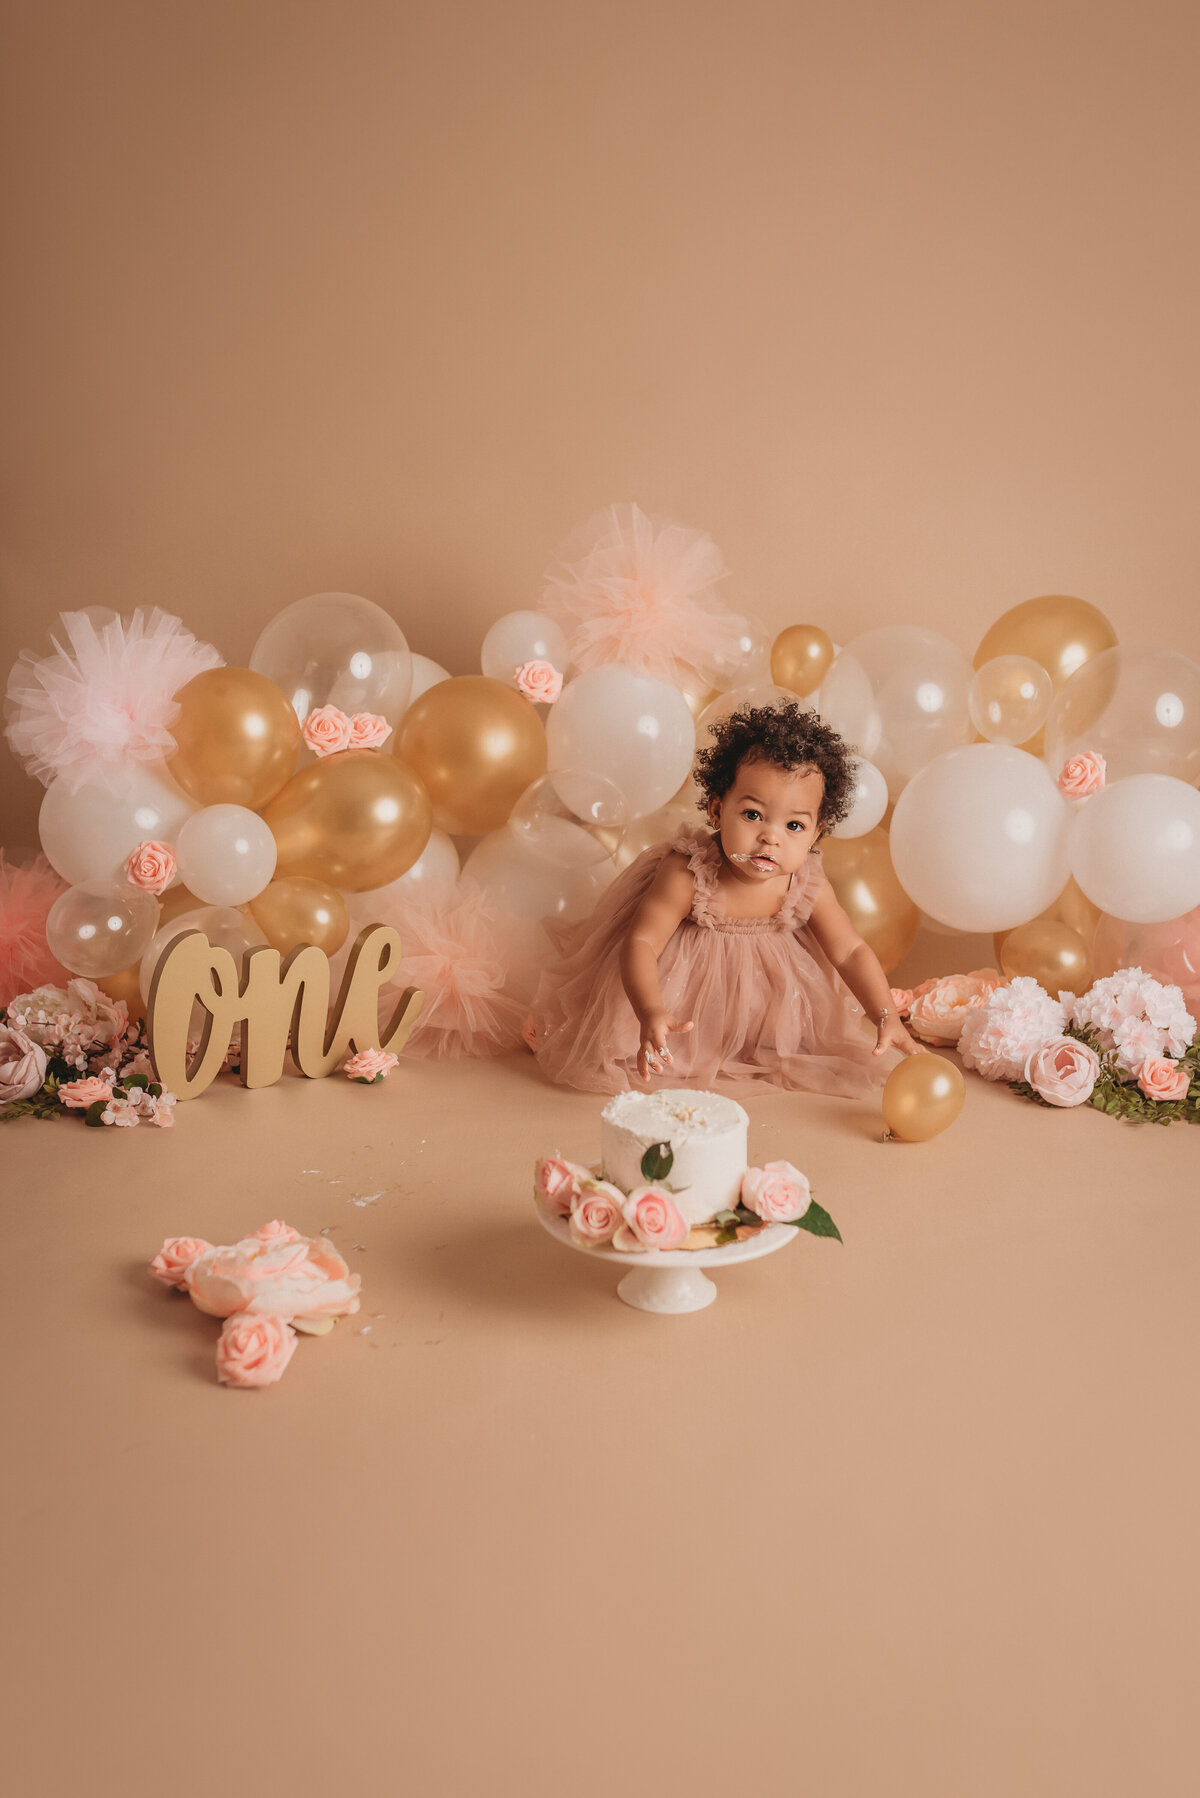 One year old baby girl in pink tulle dress on tan background with neutral colored balloon garland eating her white iced birthday cake with pink roses on it